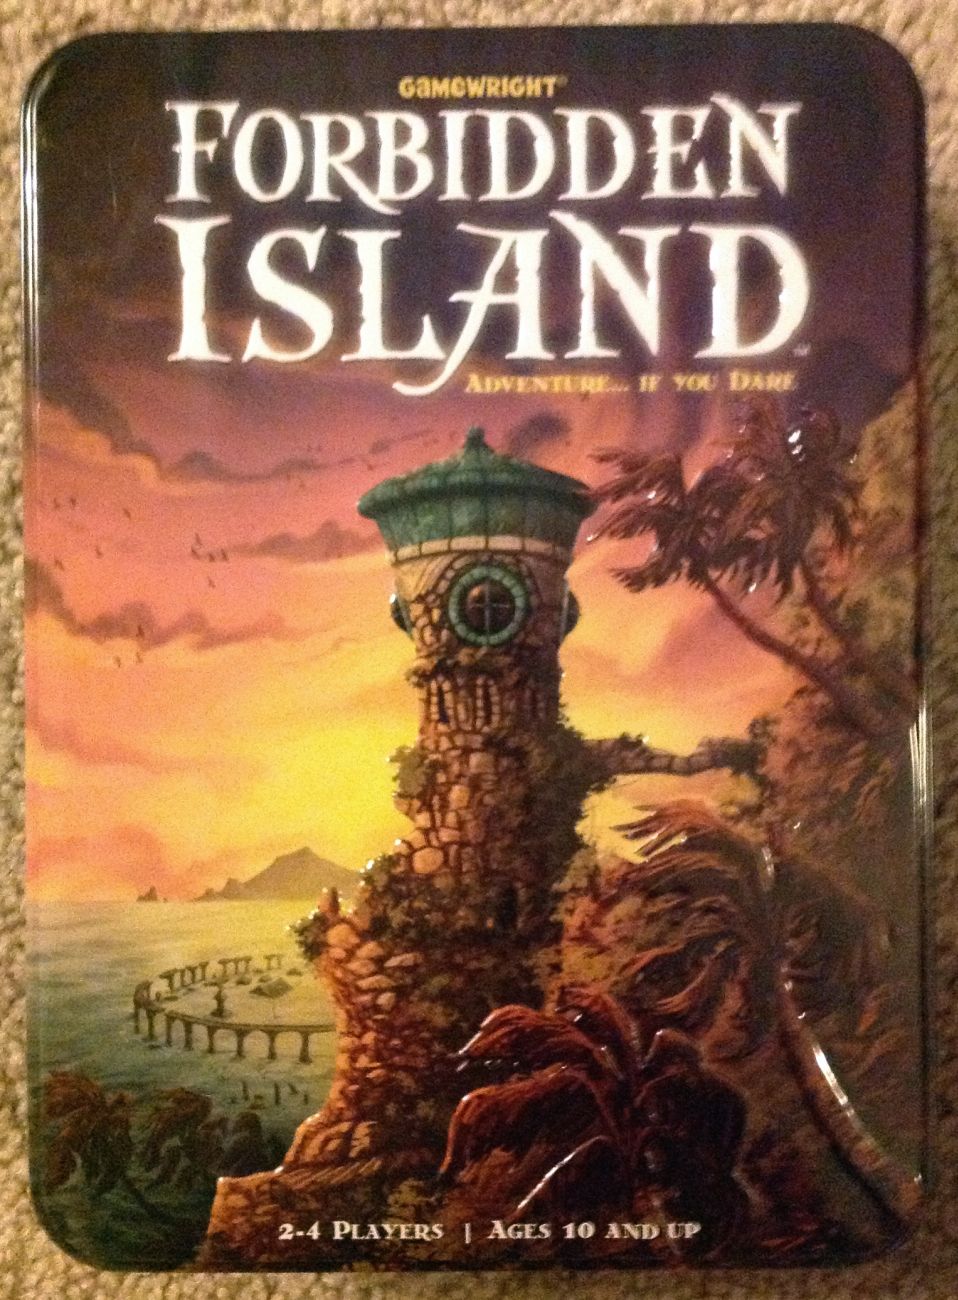 Forbidden Island: A four-sided game review - Go Play ListenGo Play Listen